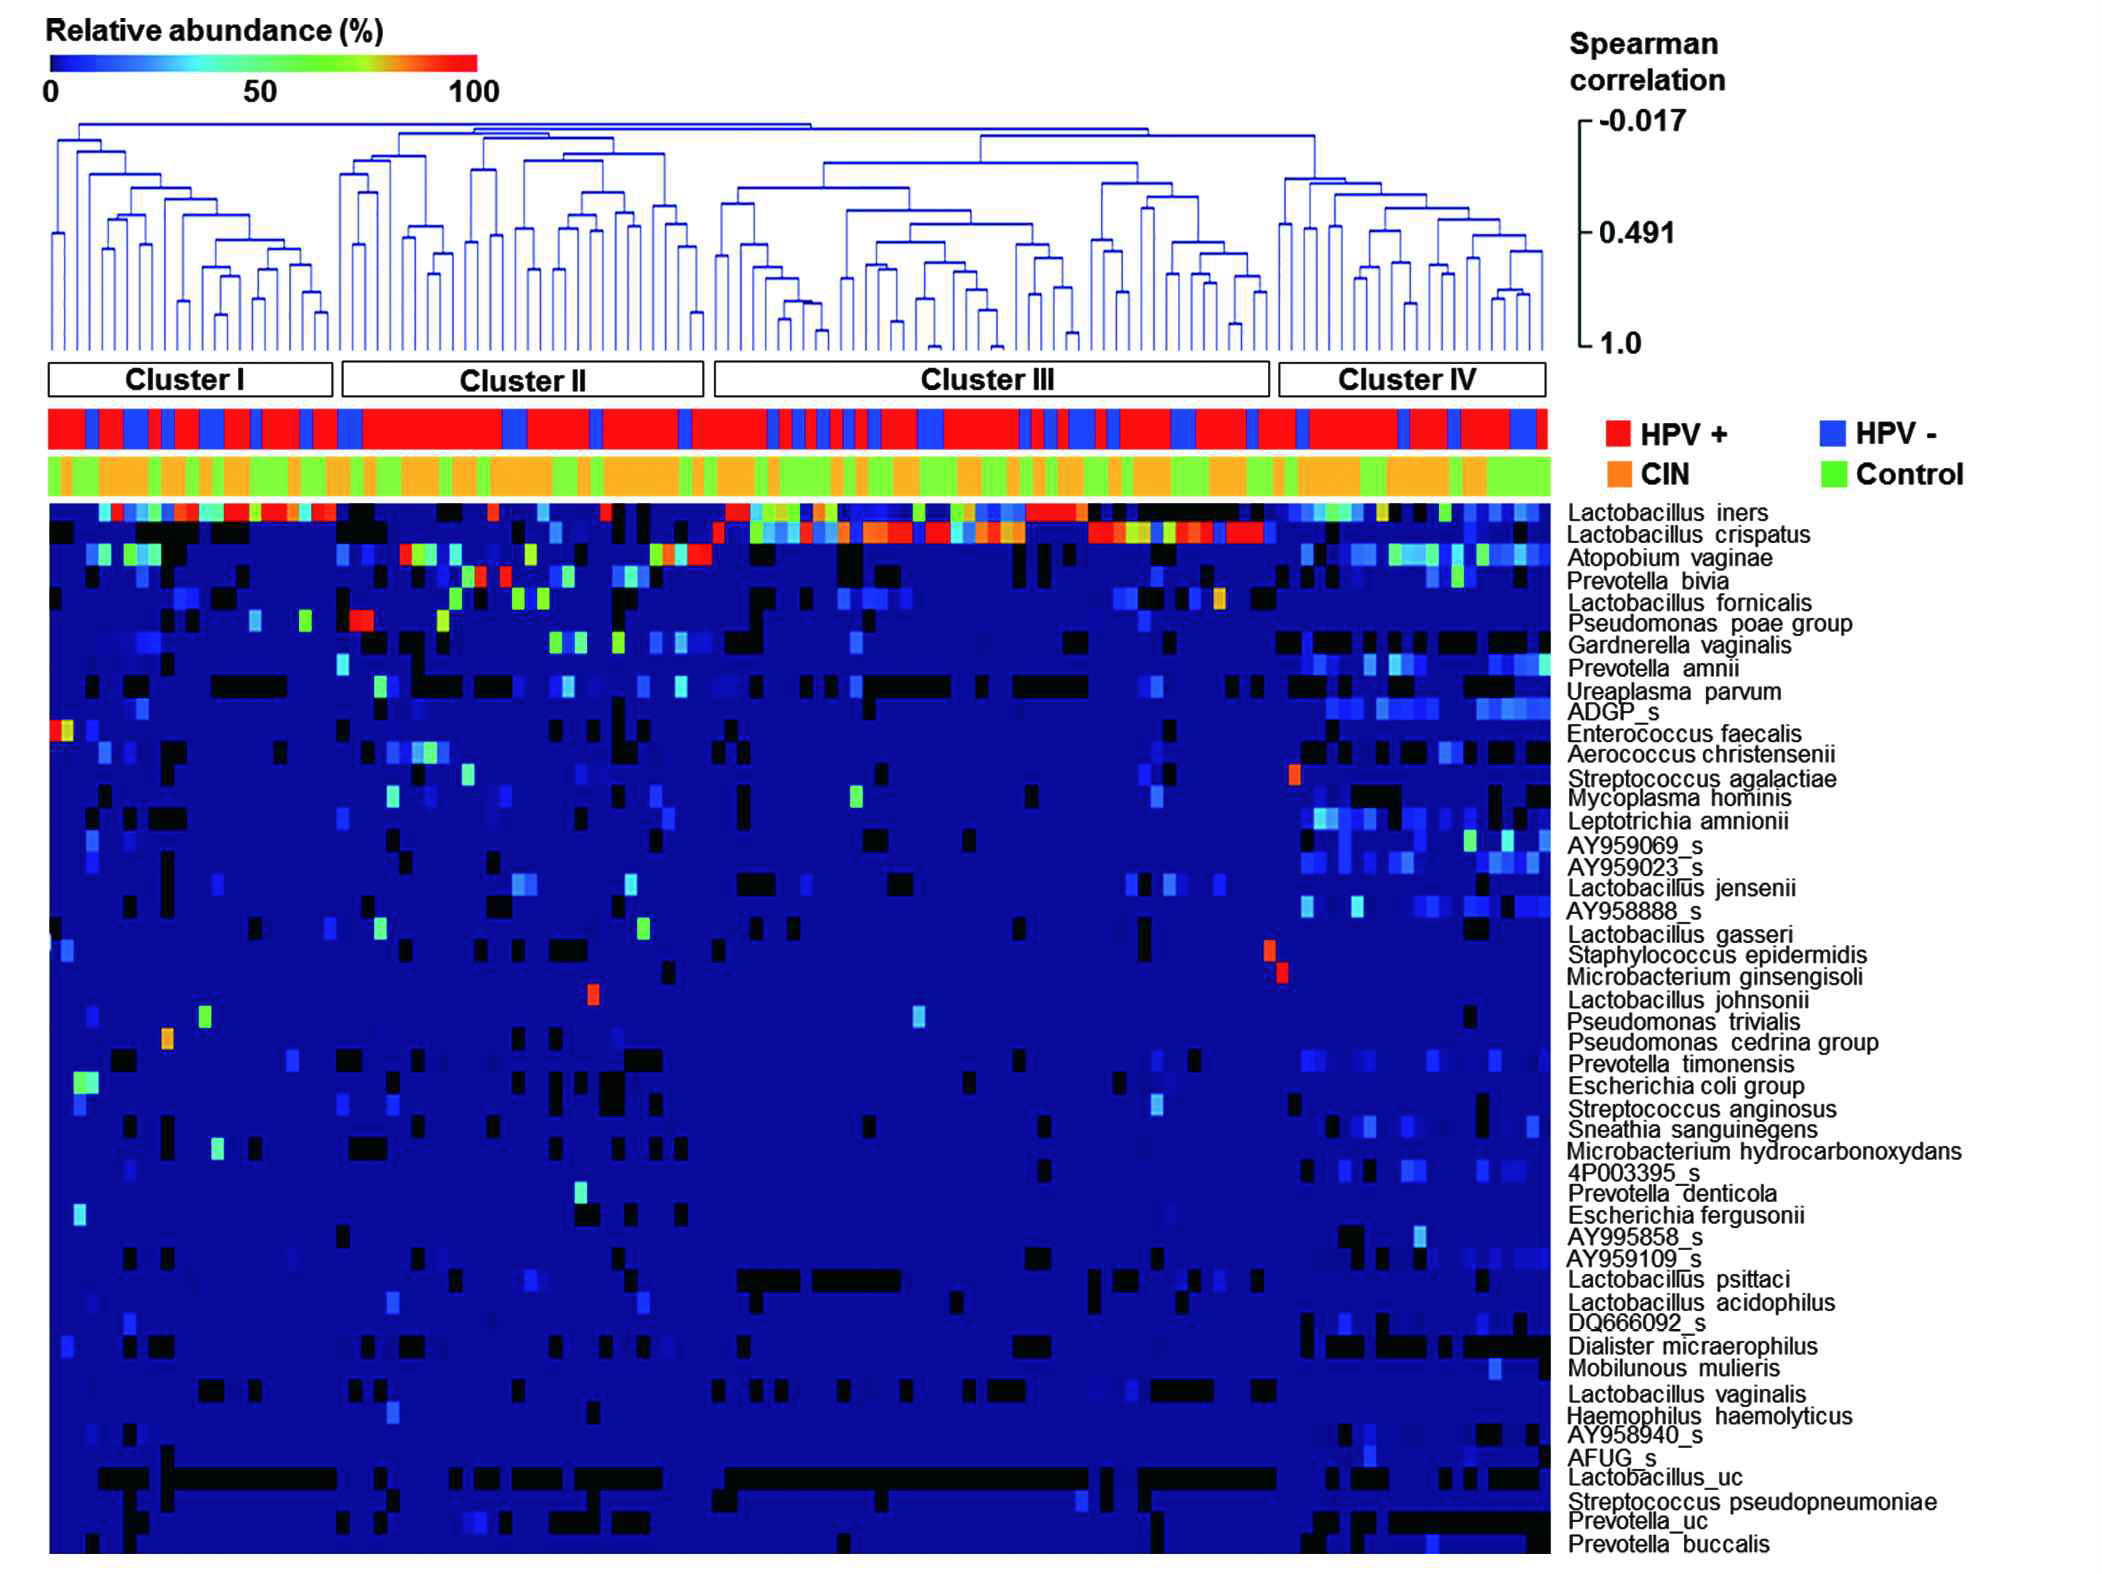 Comparison of the cervical microbiota of subjects at the species level using heatmap analysis.